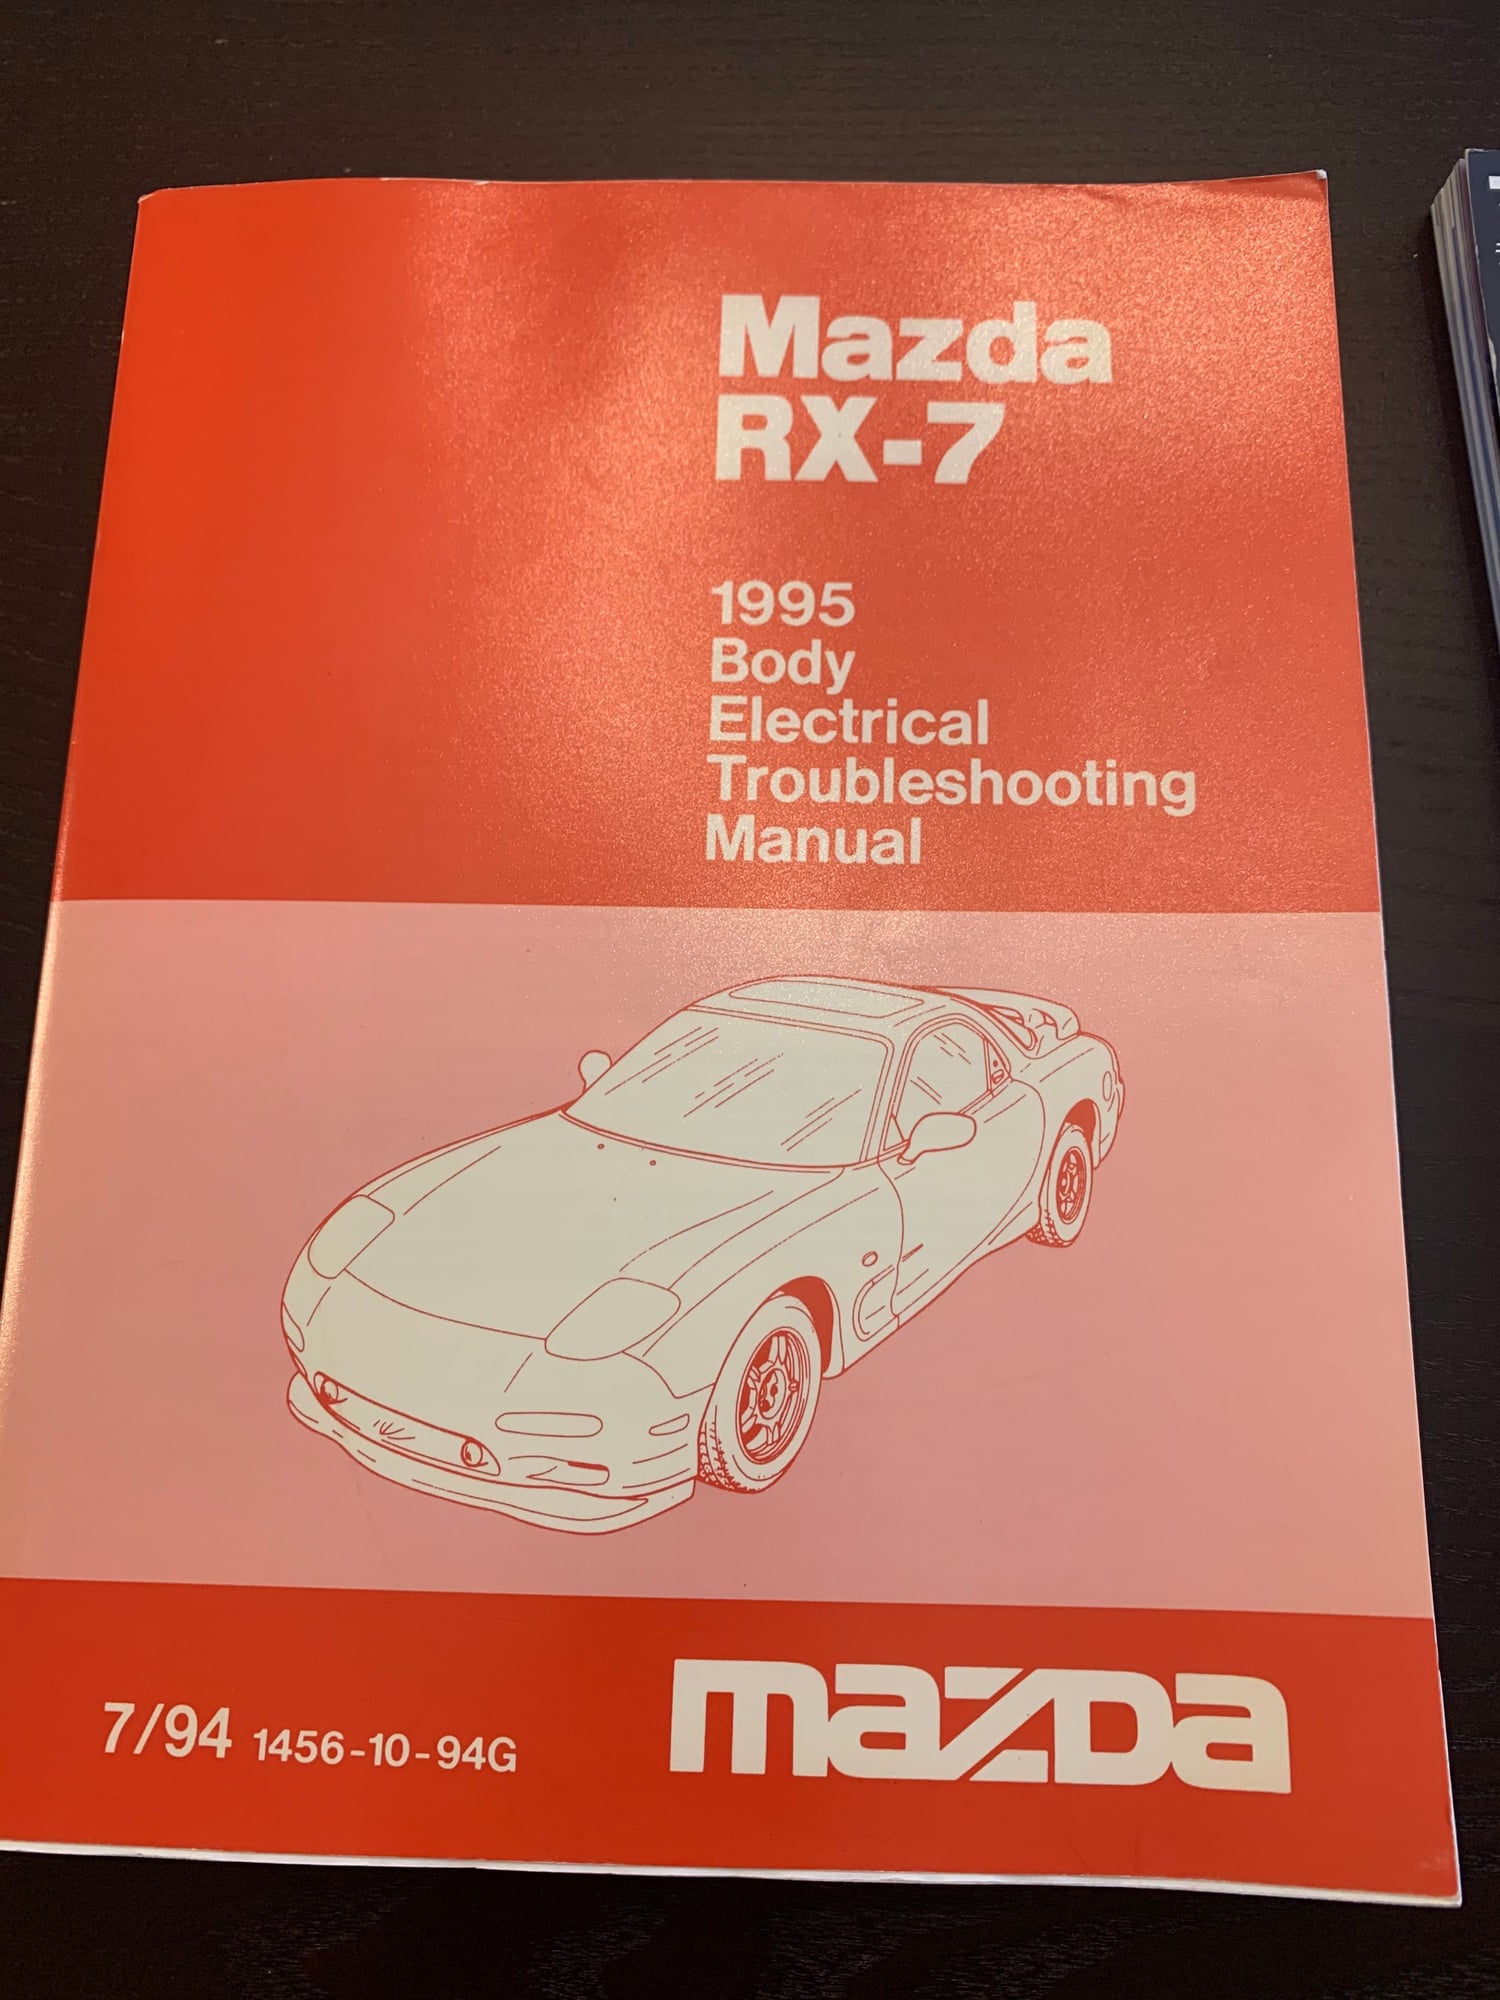 Miscellaneous - Rx7 manuals and JDM parts catalog - Used - 1993 to 1995 Mazda RX-7 - Edmonton, AB T6T0J7, Canada